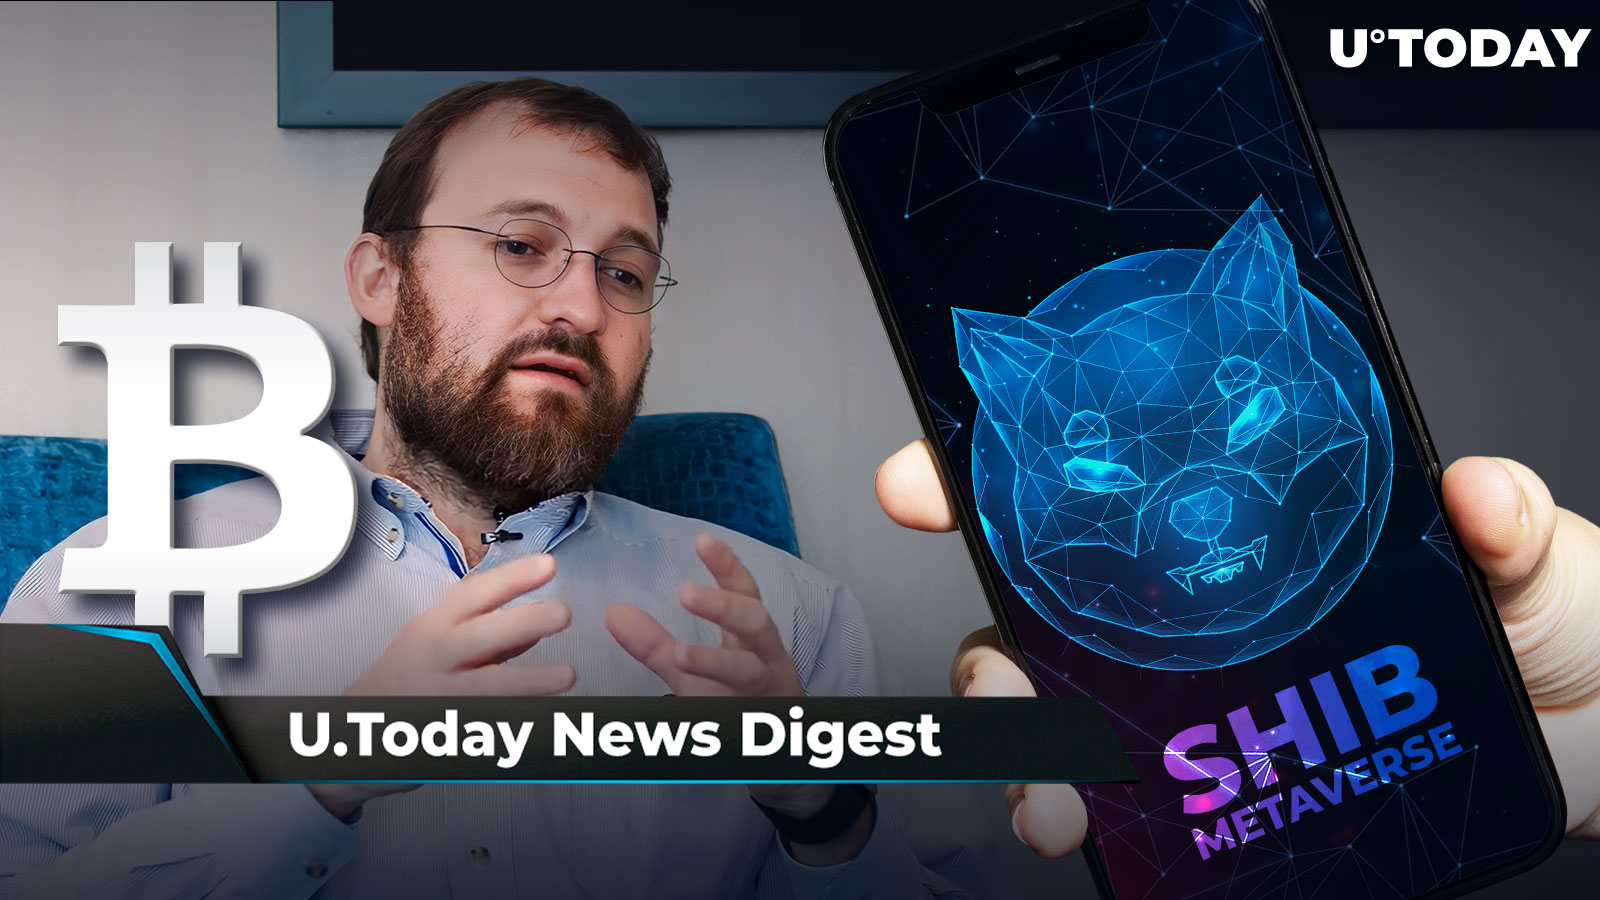 Cardano Founder Makes Staggering Prediction about BTC, XRP May Make Everyone Cry, SHIB Metaverse Team Reveals Crucial Update: Crypto News Digest by U.Today